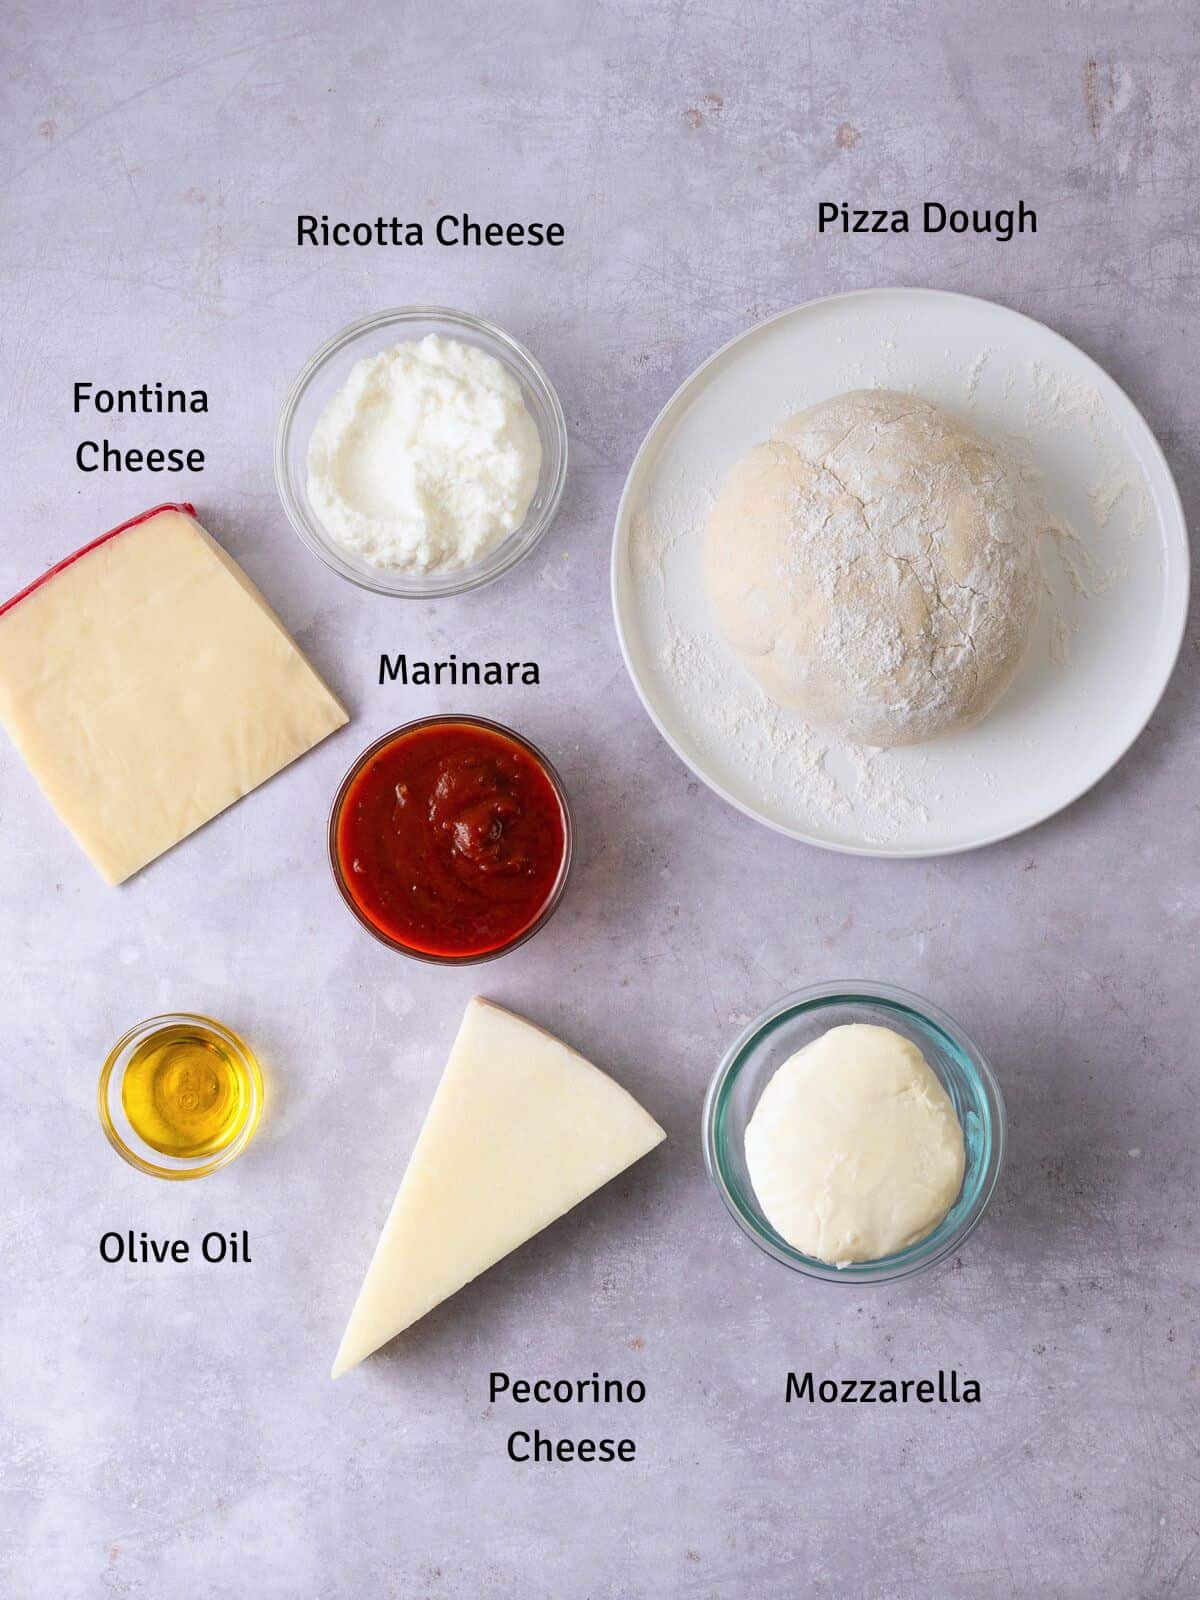 Ingredients for cheese calzone including pizza dough and four cheeses, pecorino, mozzarella, fontina and ricotta cheese.